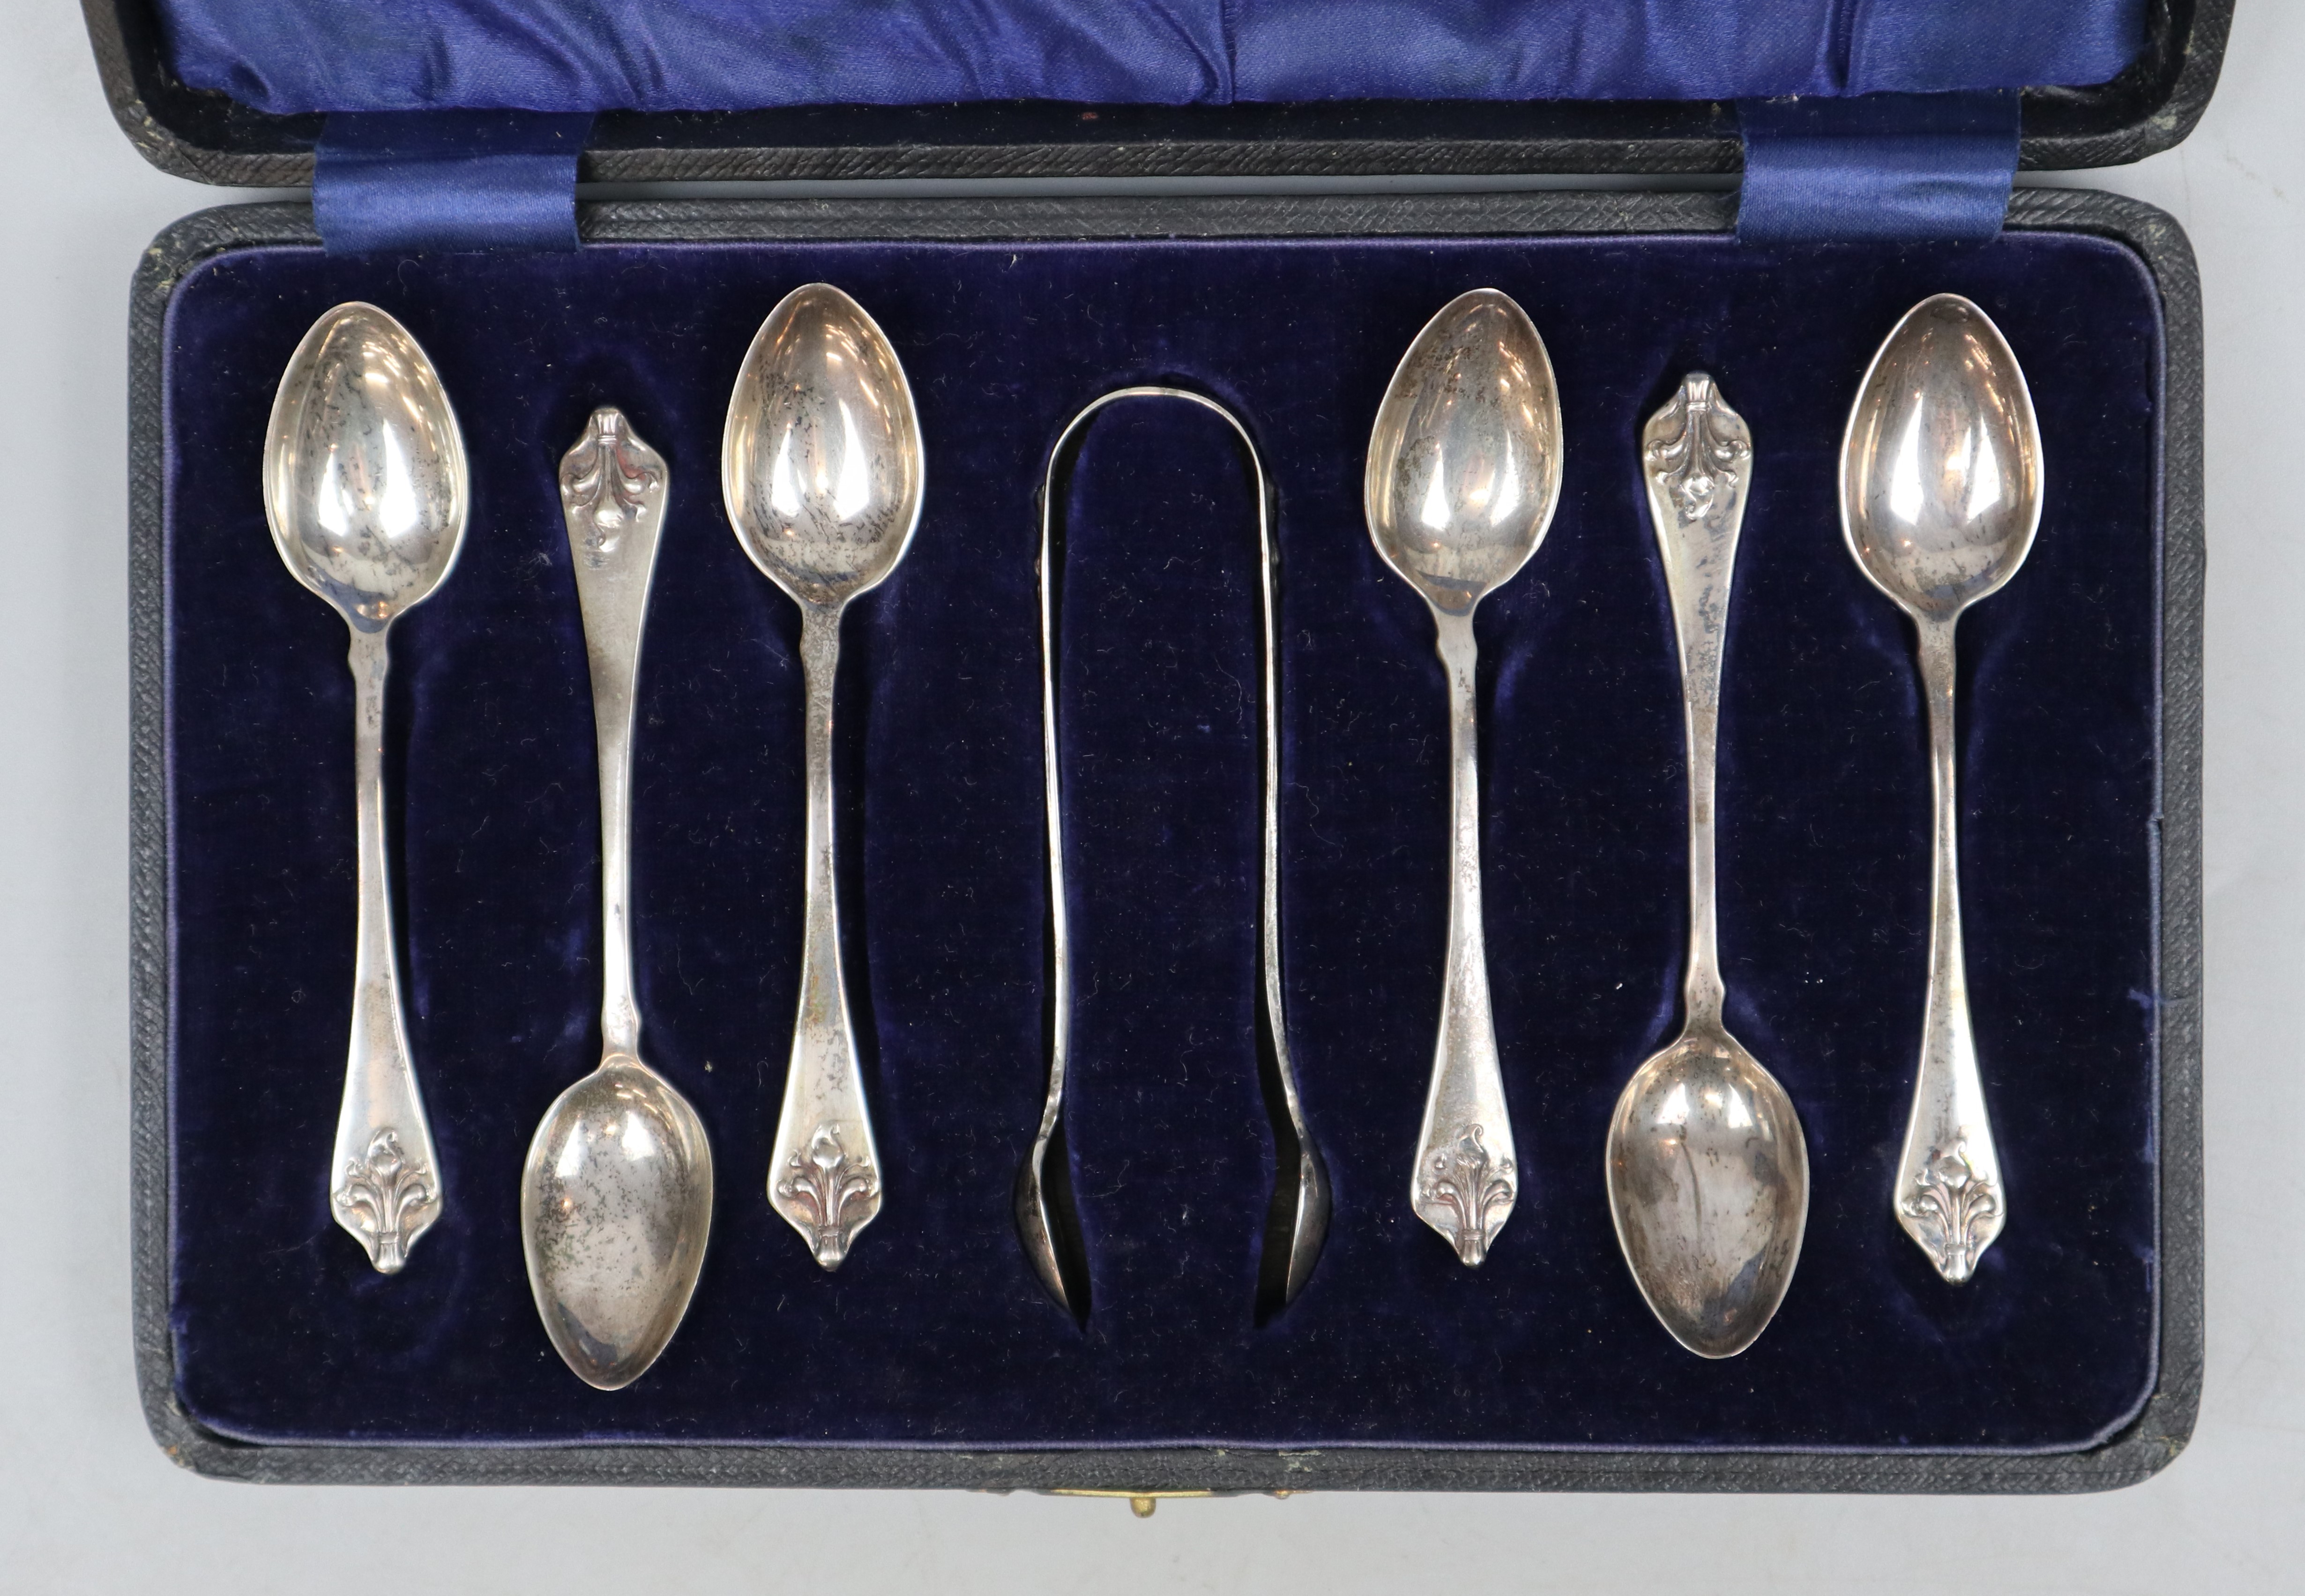 Cased set of 6 silver spoons together with sugar tongs - Approx weight 101g - Image 2 of 2